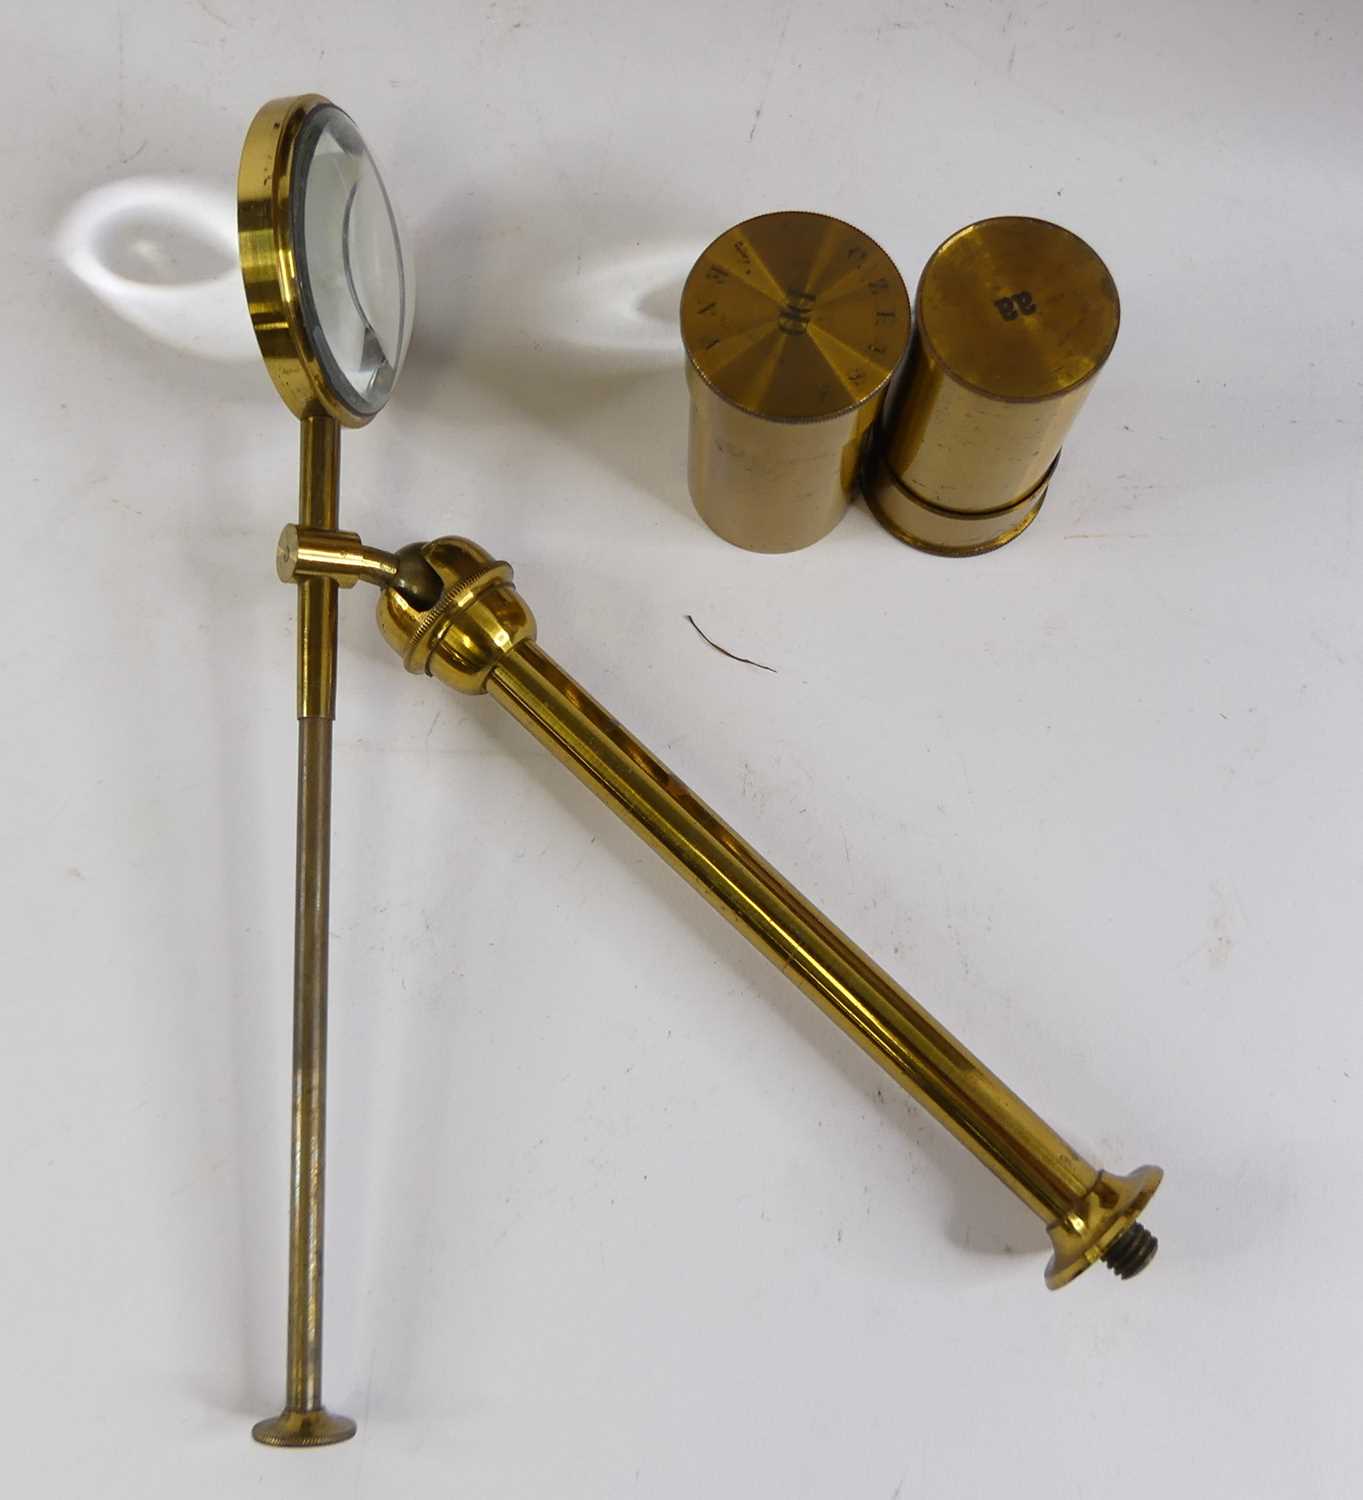 A brass monocular microscope, stamped J White Glasgow to the base, cased with accessories - Image 3 of 3